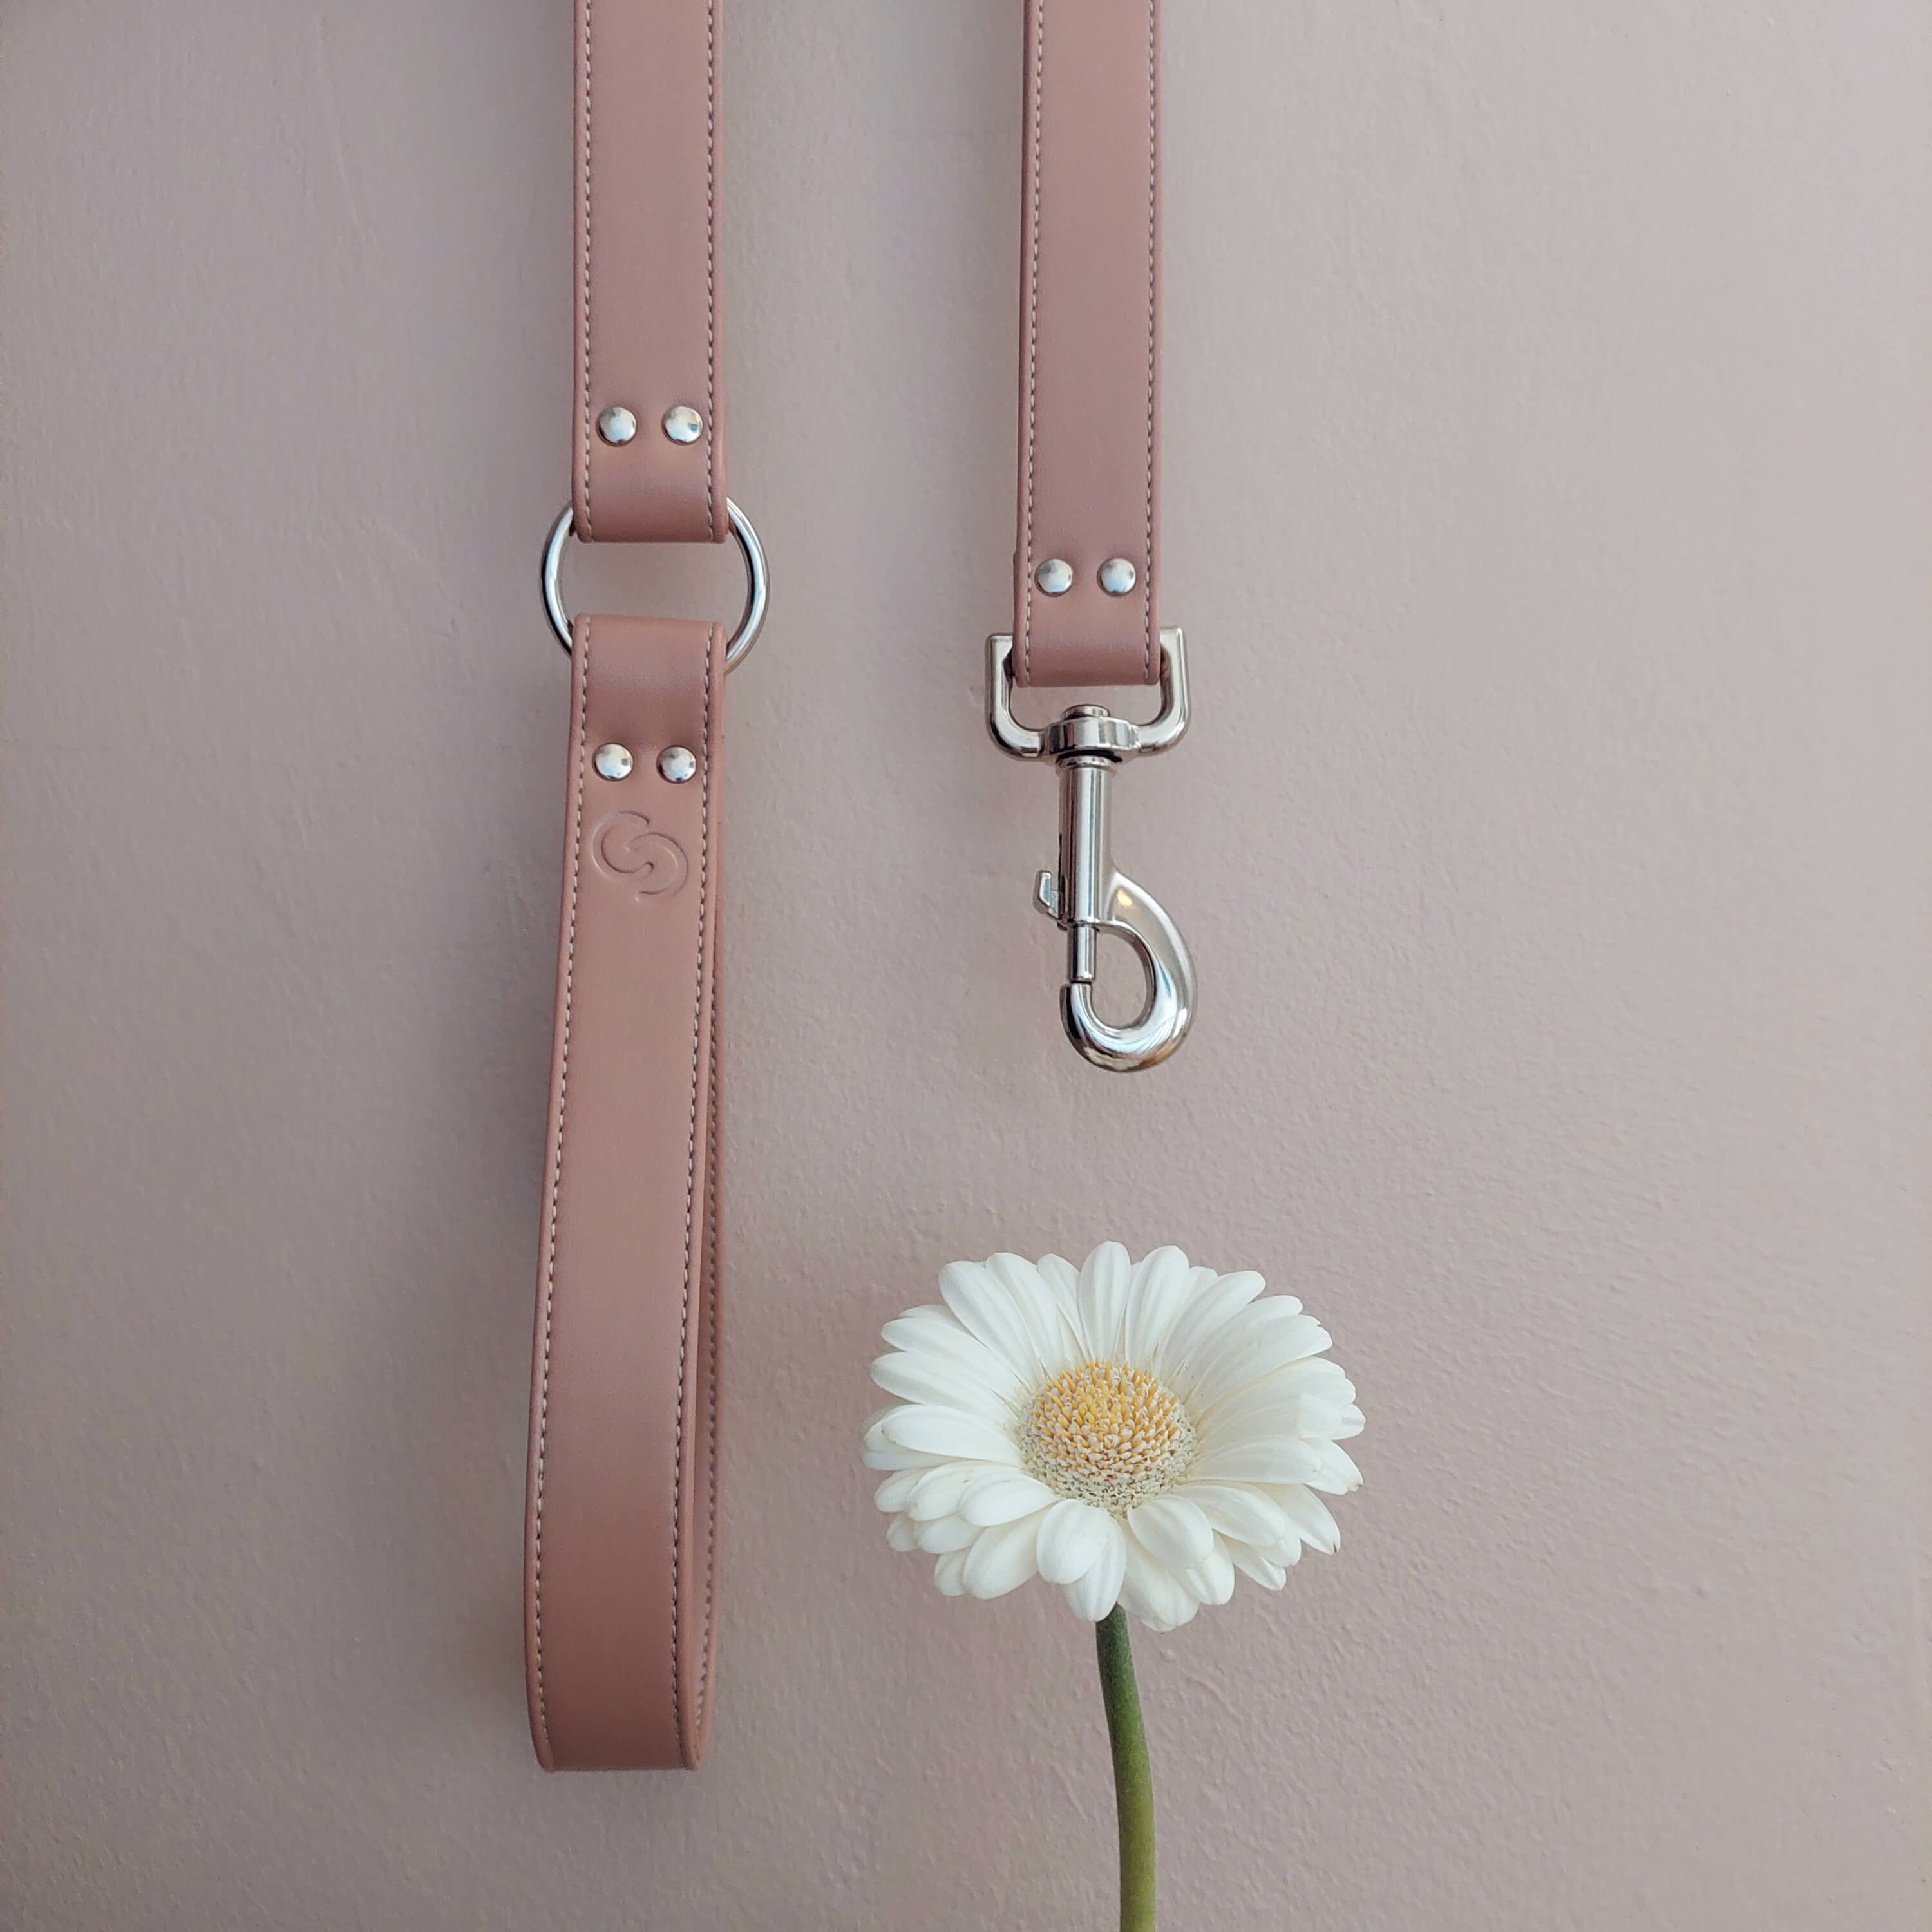 Dog Lead - Vegan Apple Leather | Blush Pink | by Skylos Collective - Lifestory - Skylos Collective